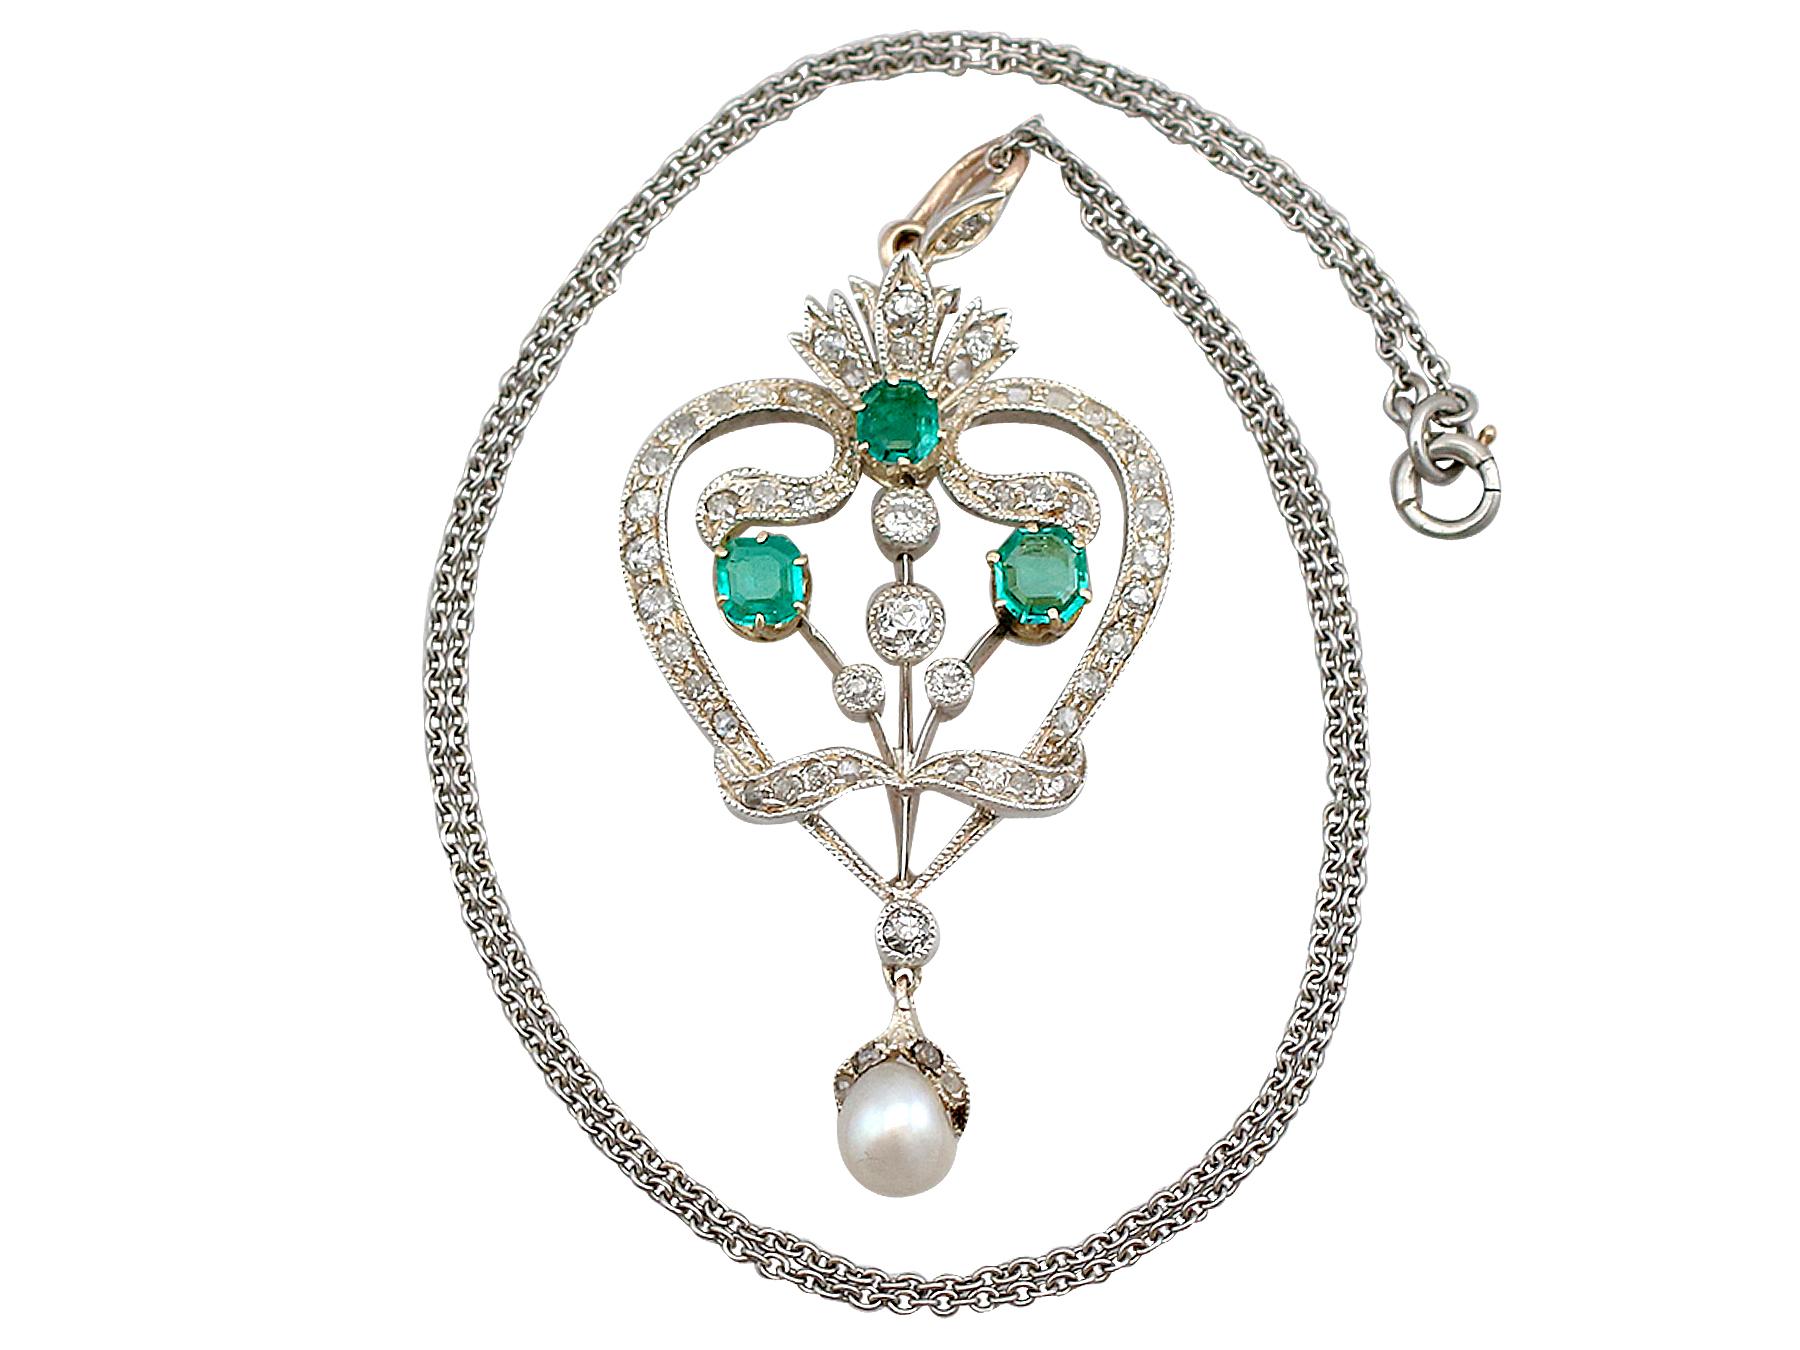 A stunning antique 1.05 carat emerald and 1.04 carat diamond, 9k yellow gold and silver set pendant / brooch with platinum chain; part of our diverse antique jewellery collections.

This stunning, fine and impressive antique emerald and diamond